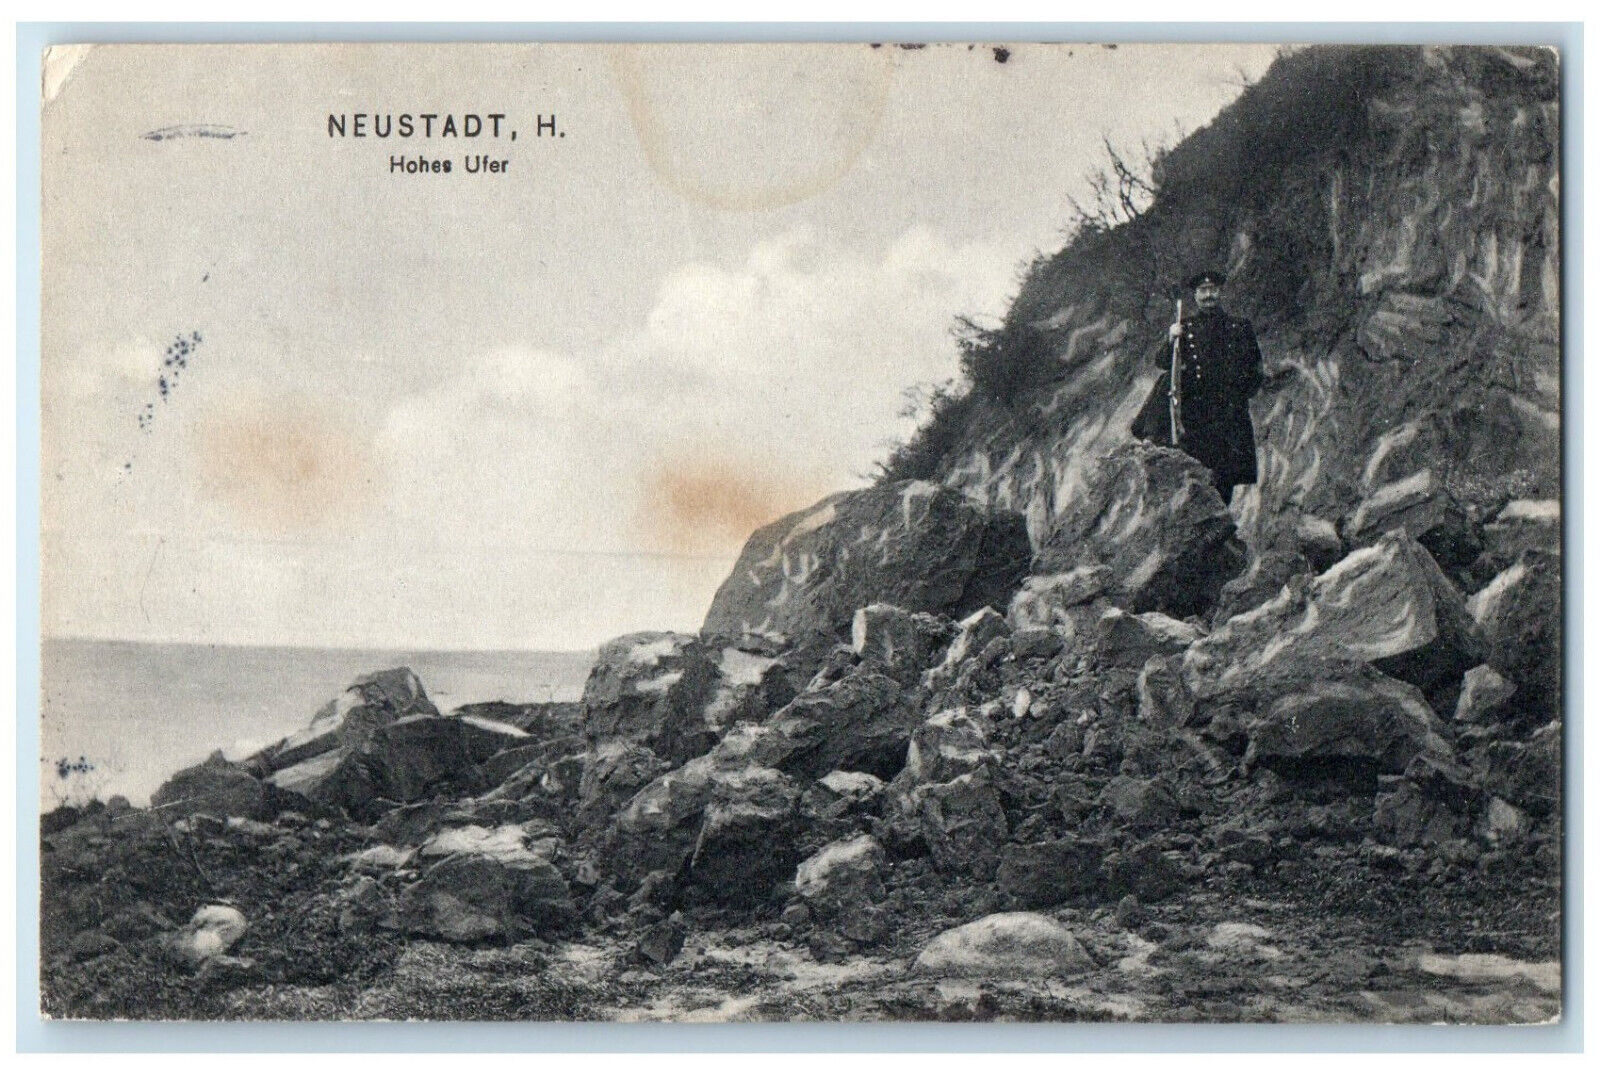 c1910 Army Gard Standing on Rocky Side Hohes Ufer Neustadt H. Germany Postcard